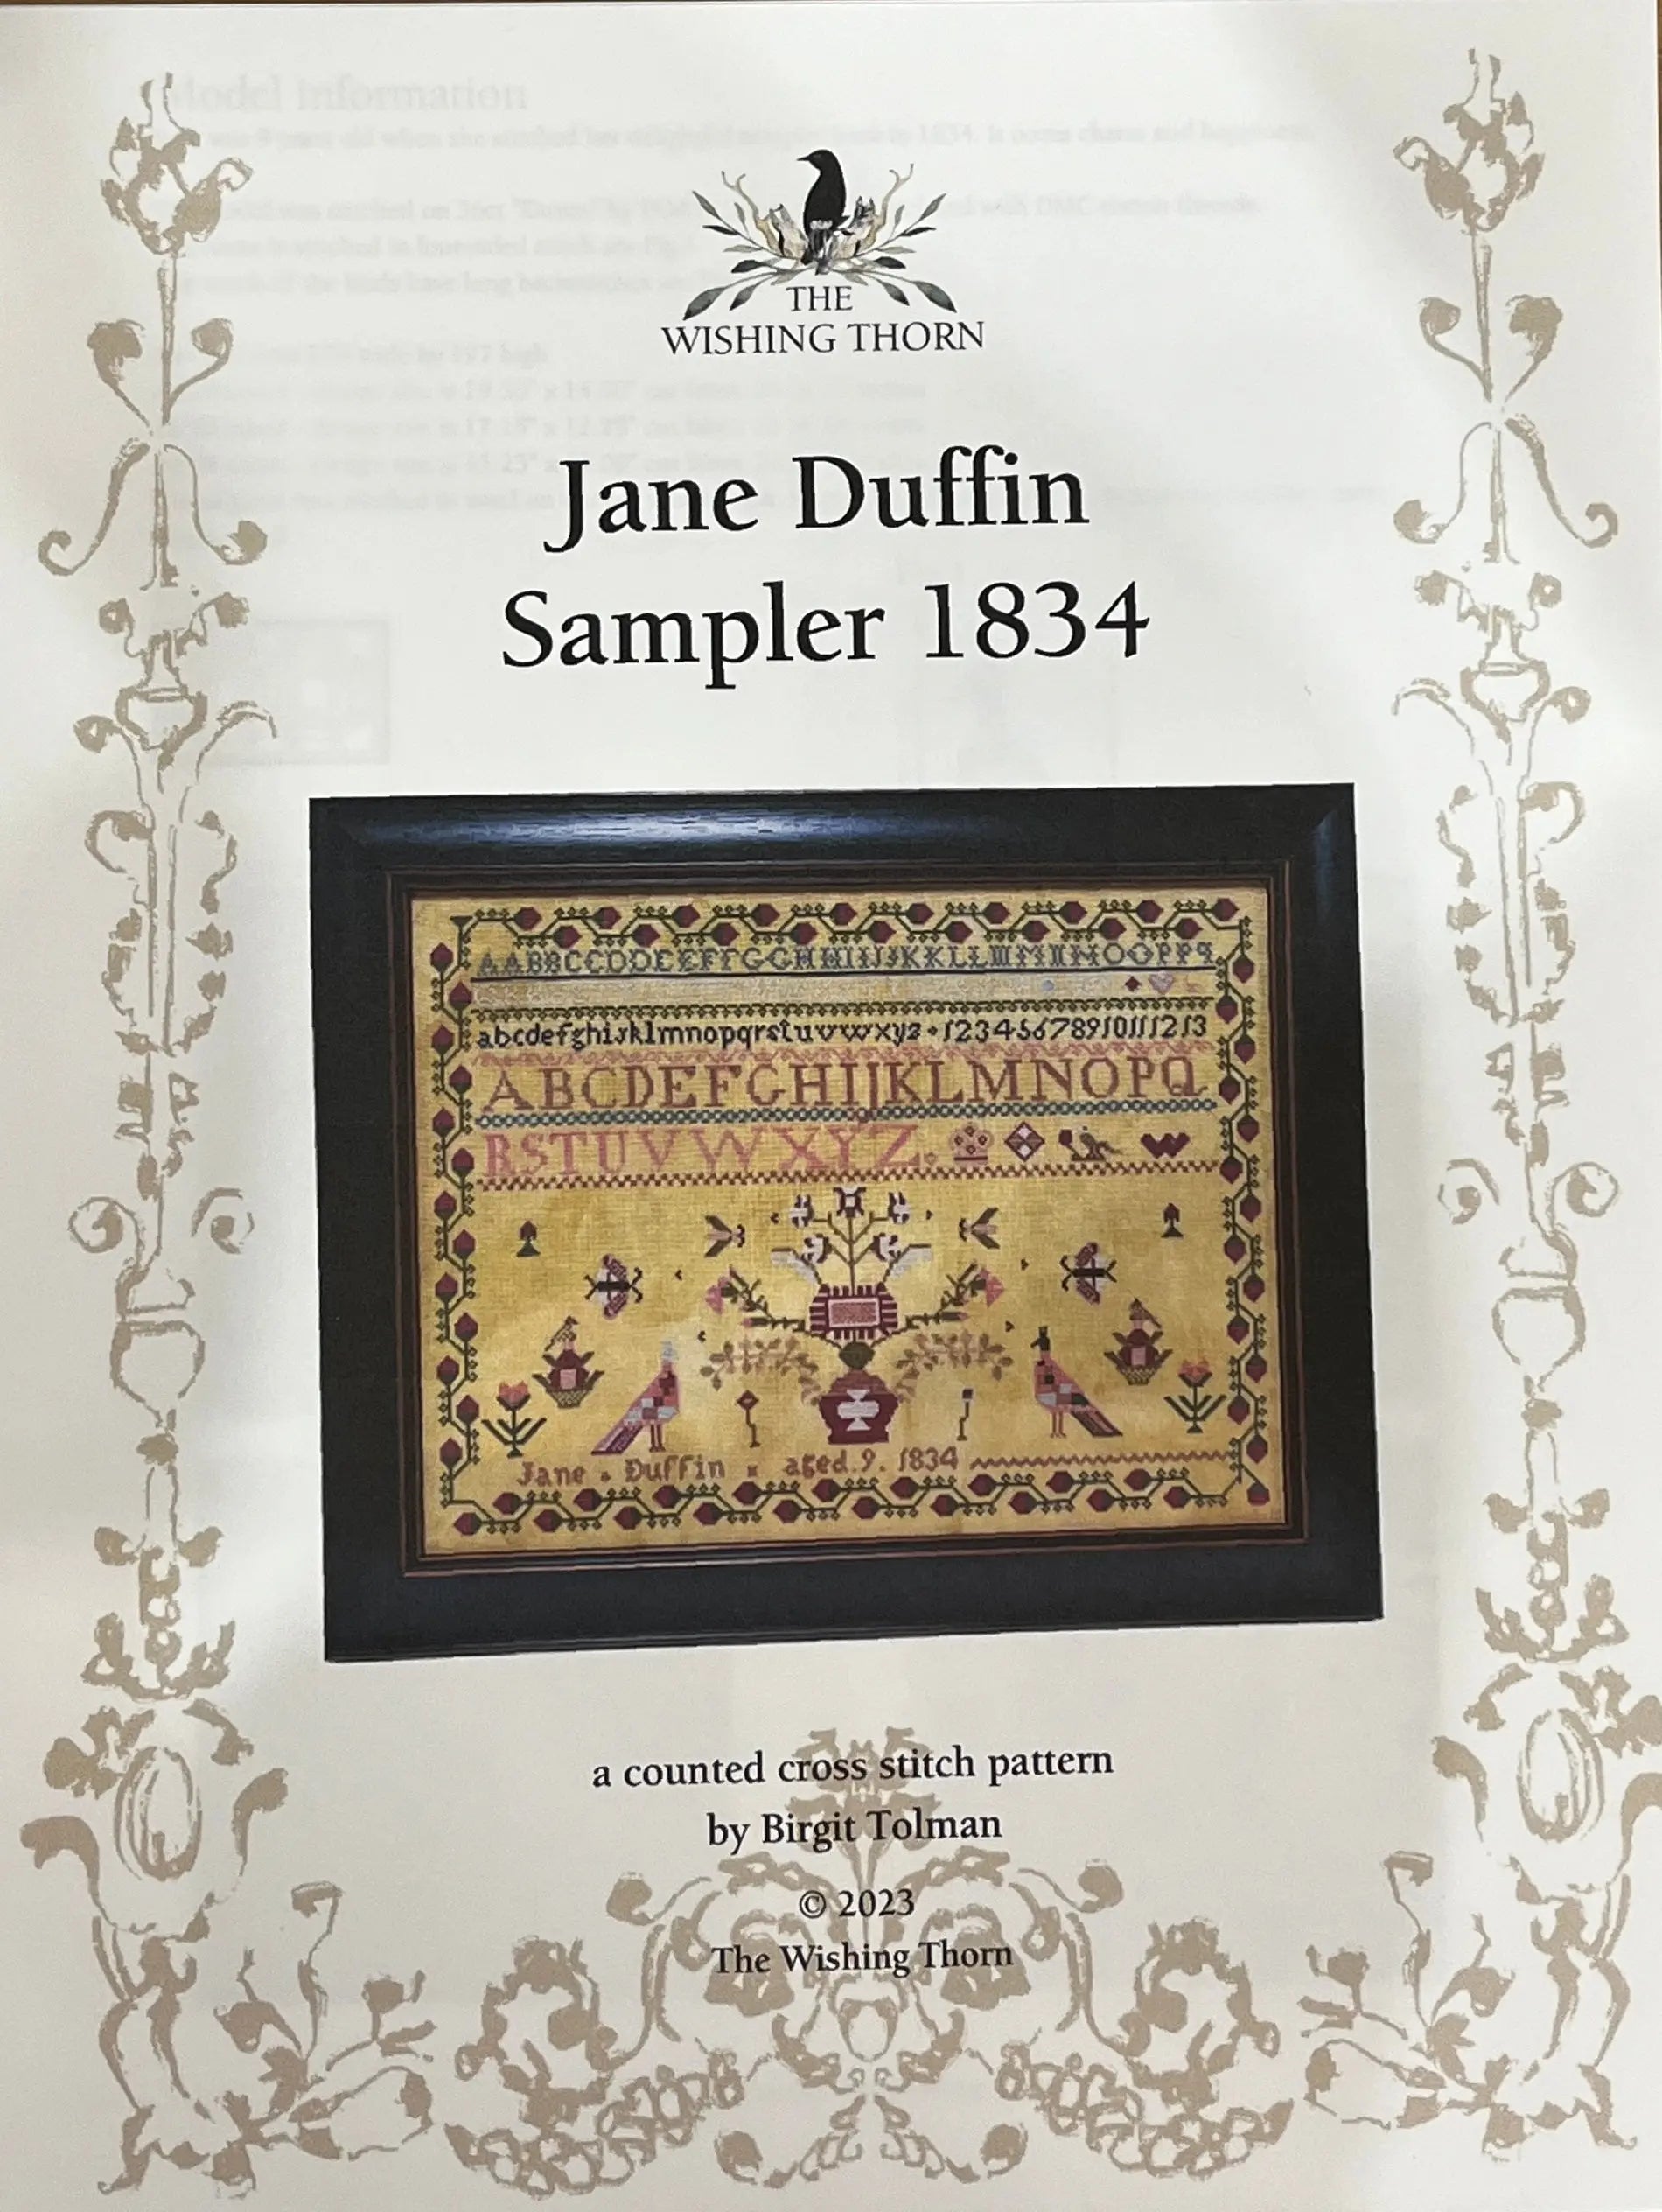 Jane Duffin Sampler 1834 by The Wishing Thorn The Wishing Thorn